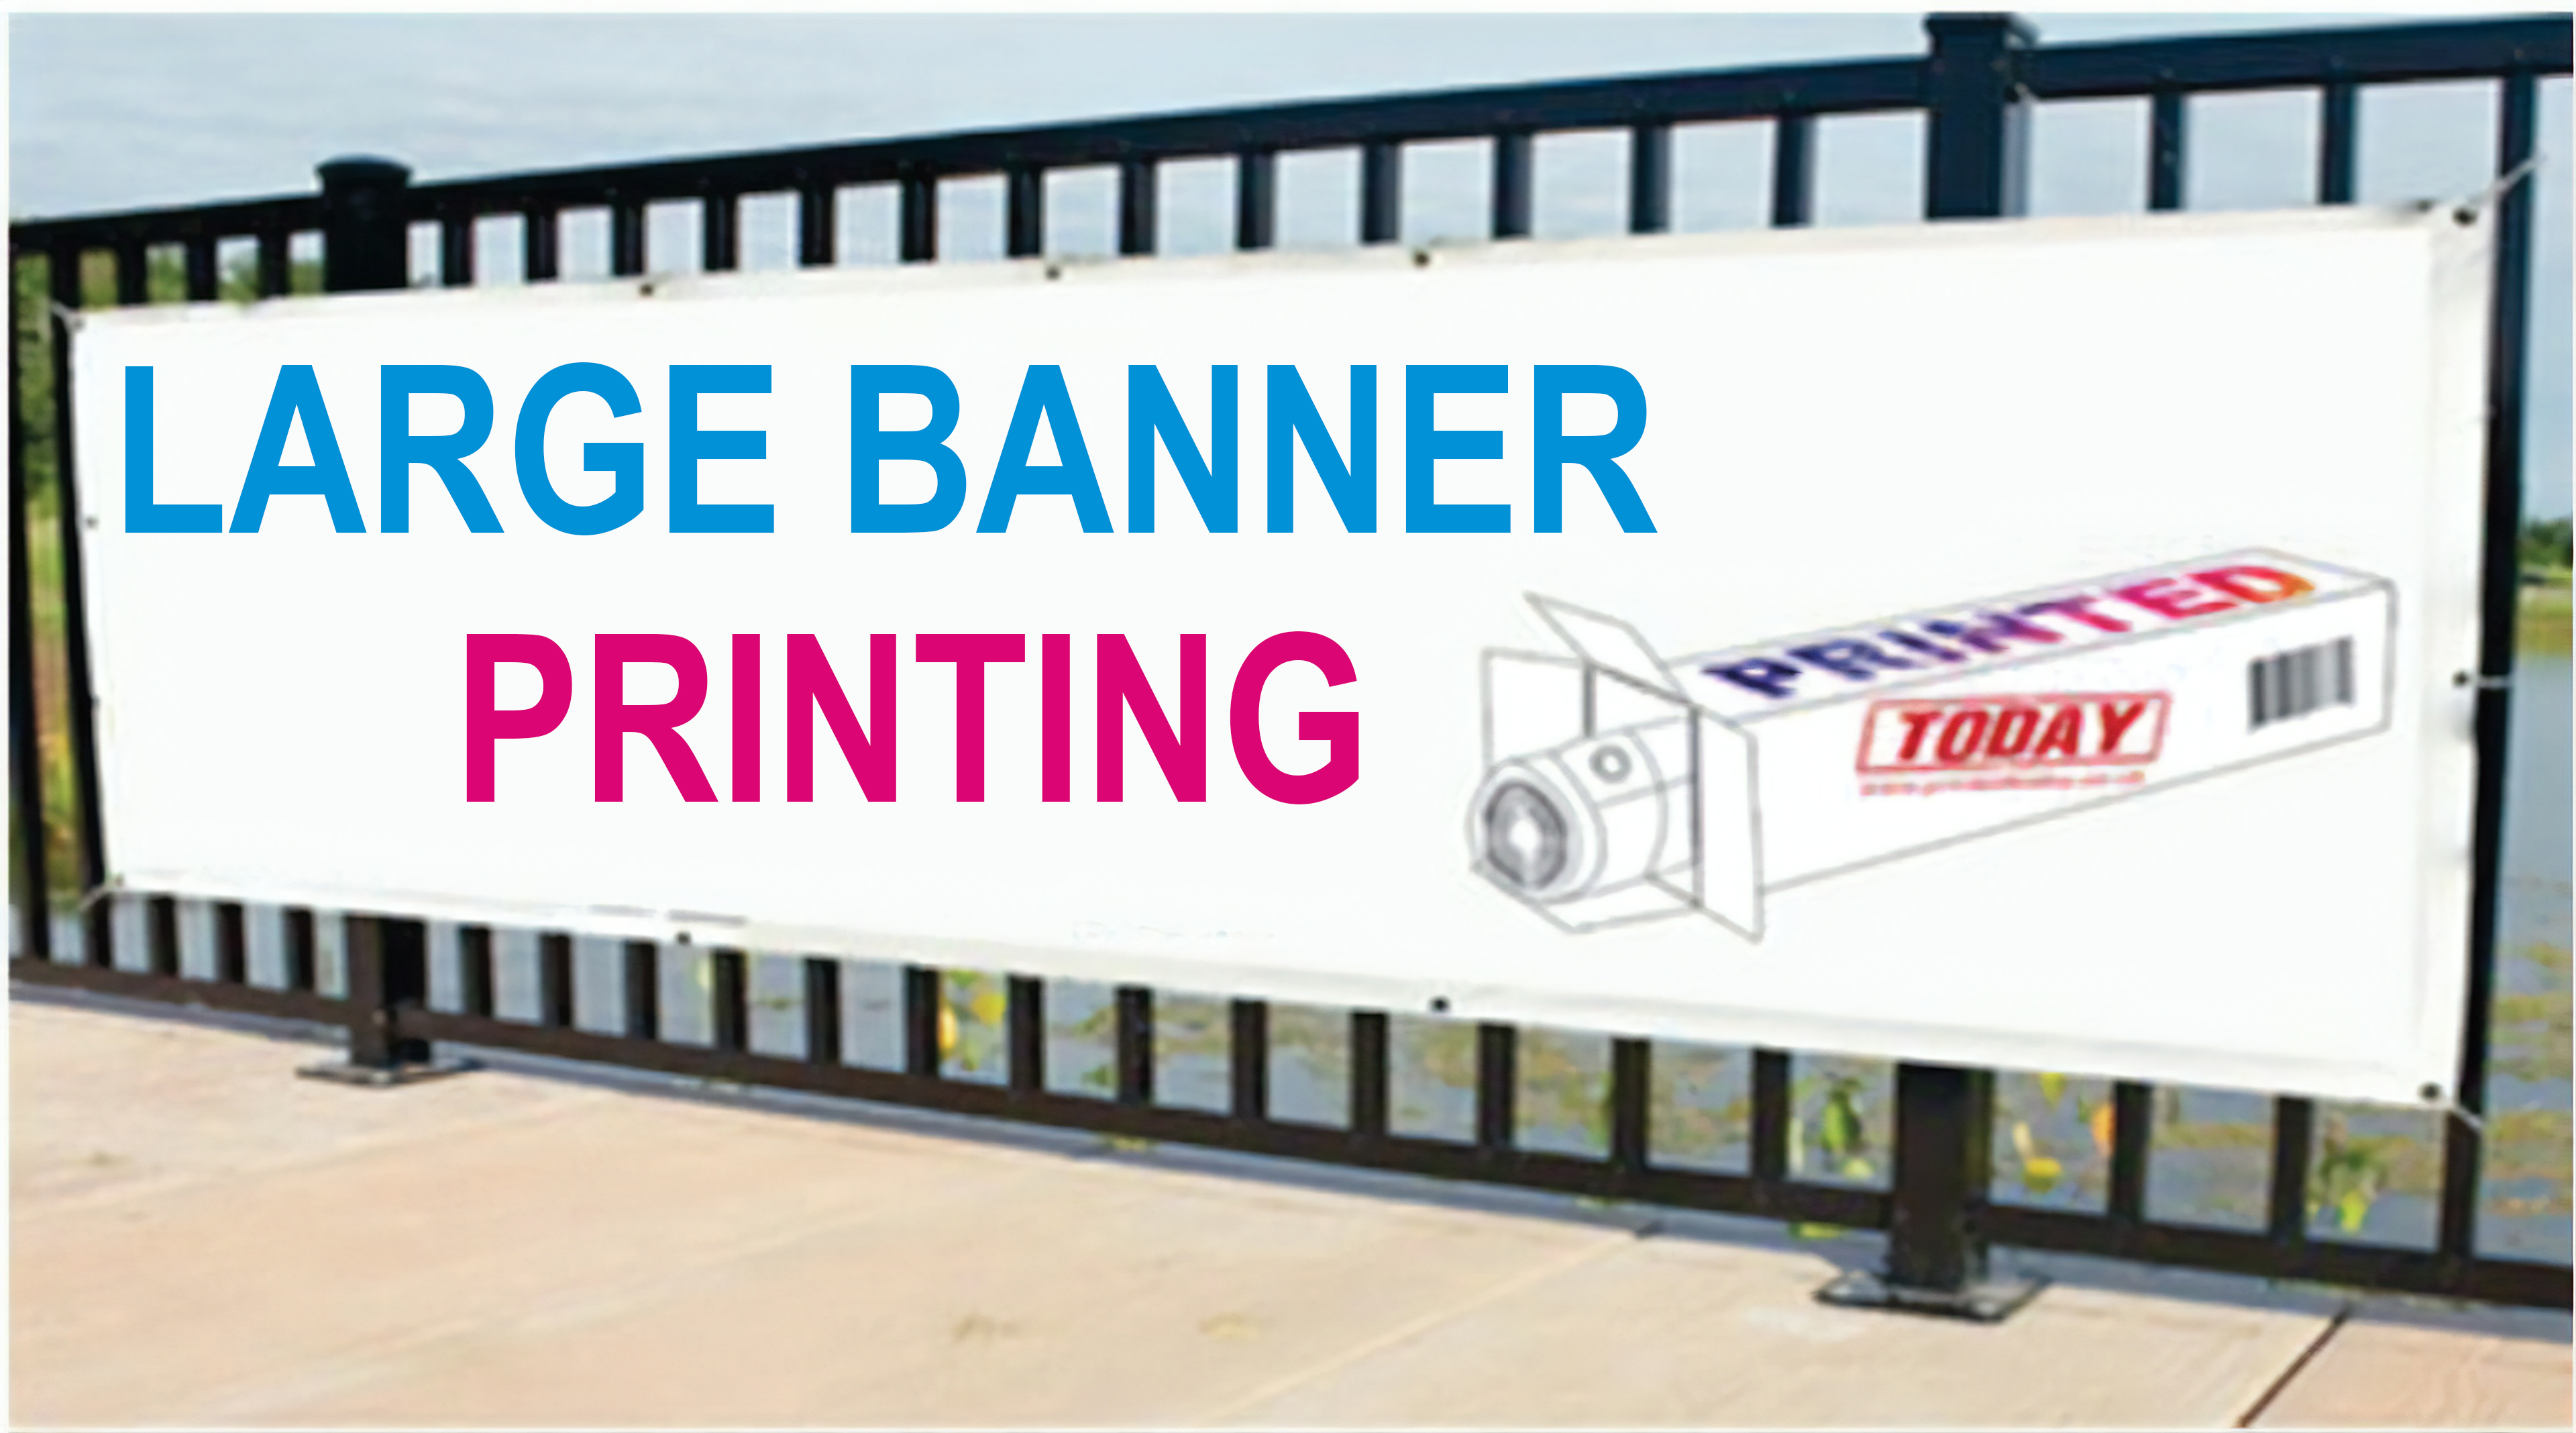 large-banner-printing-upto-25-off-only-printed-today